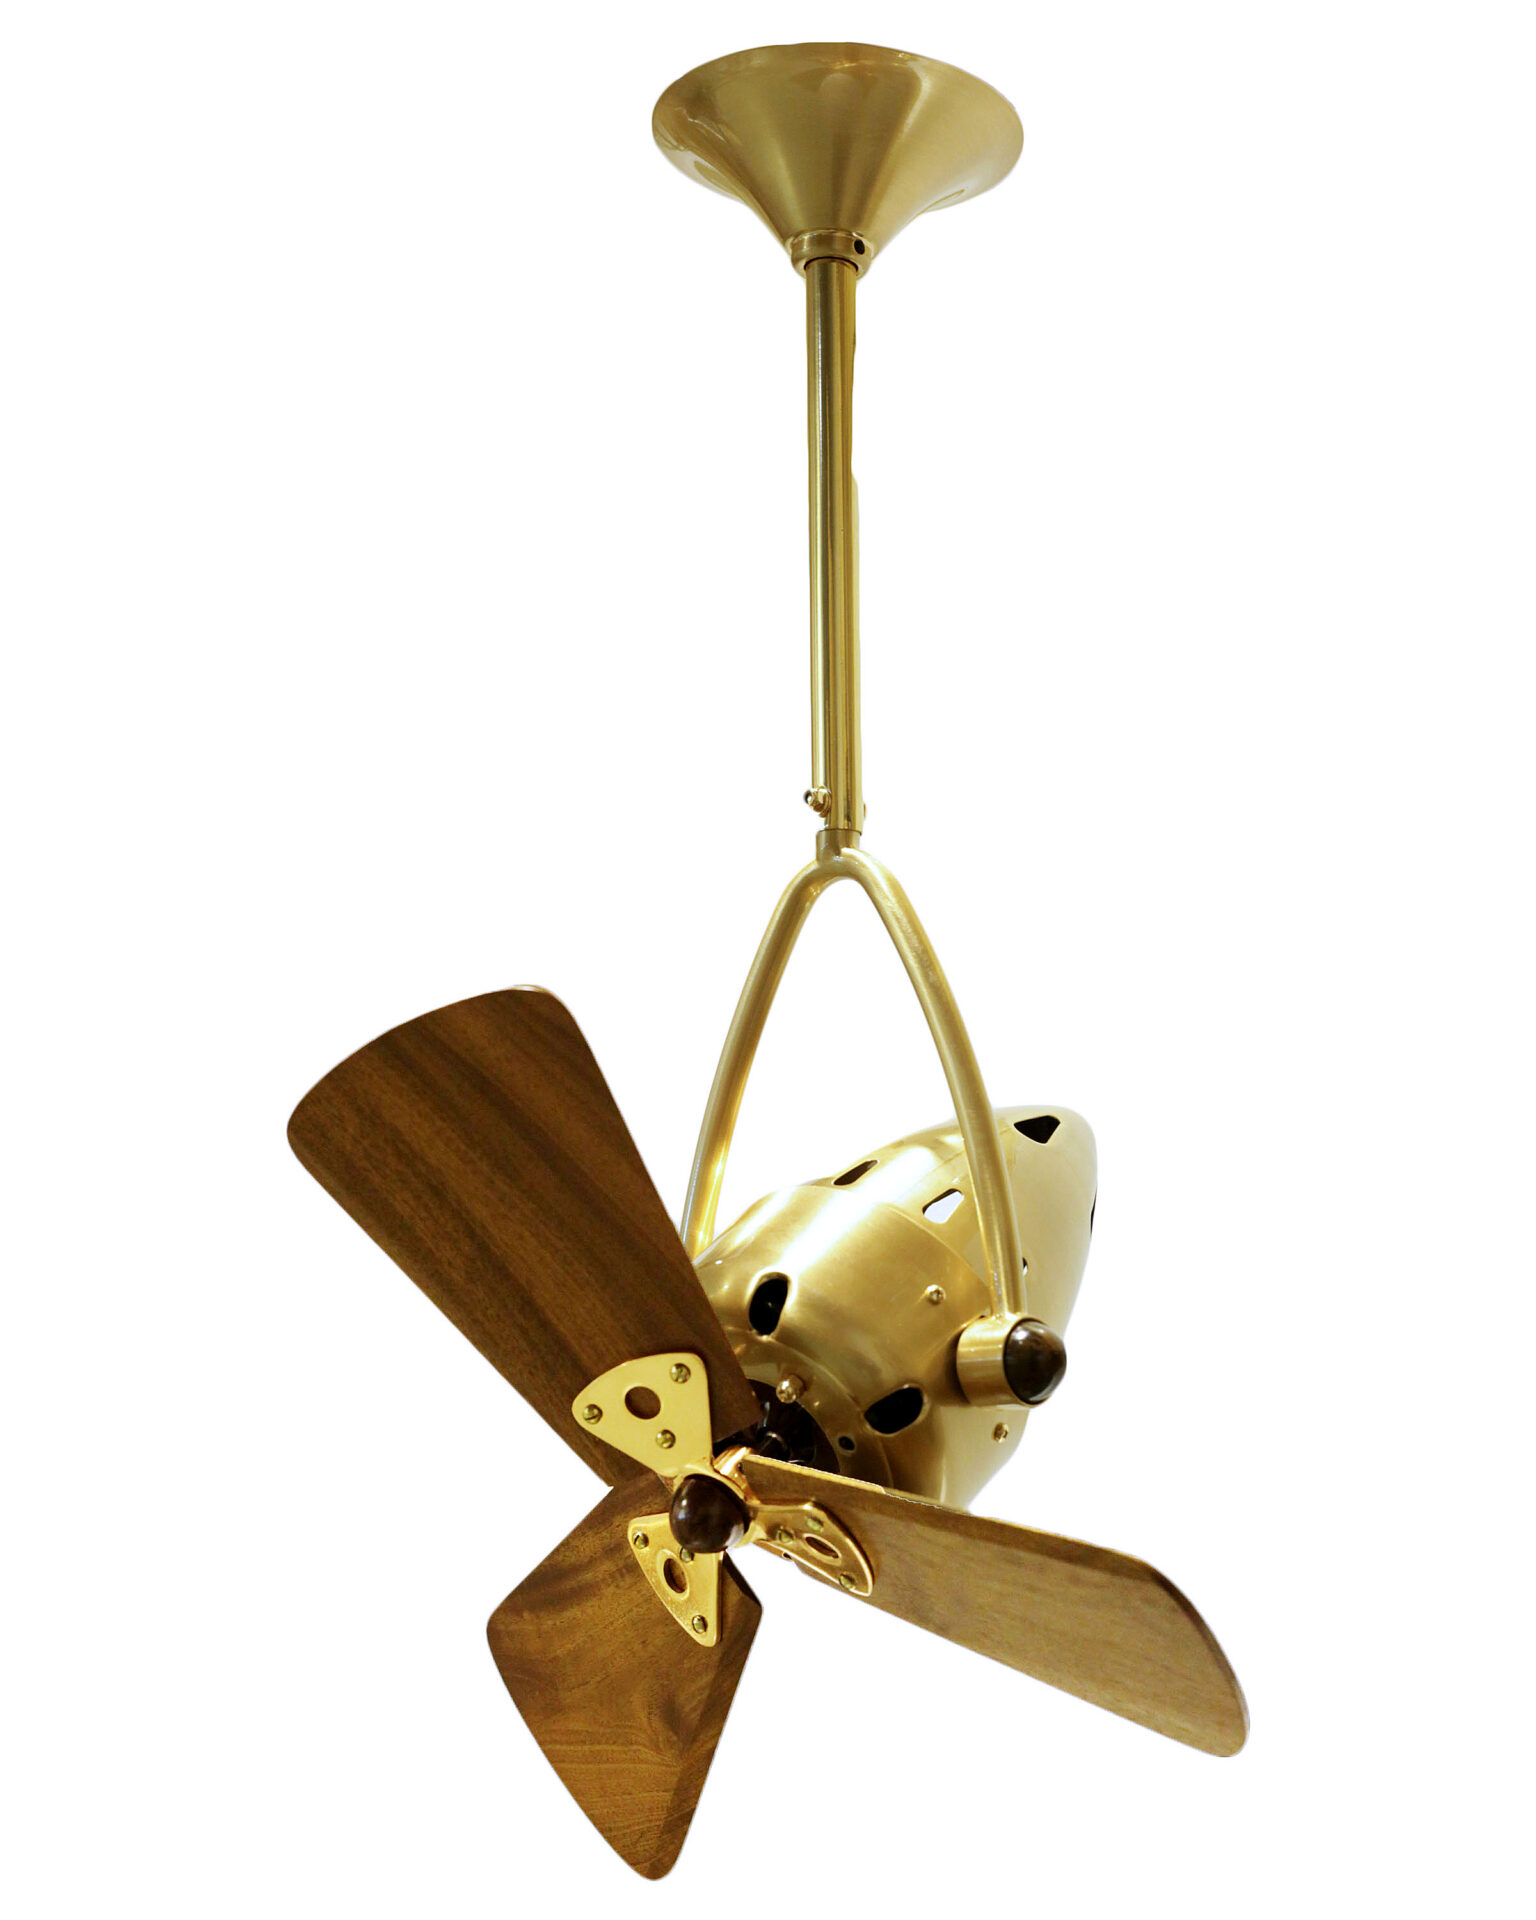 Jarold Direcional Ceiling Fan in Brushed Brass Finish with Mahogany Wood Blades